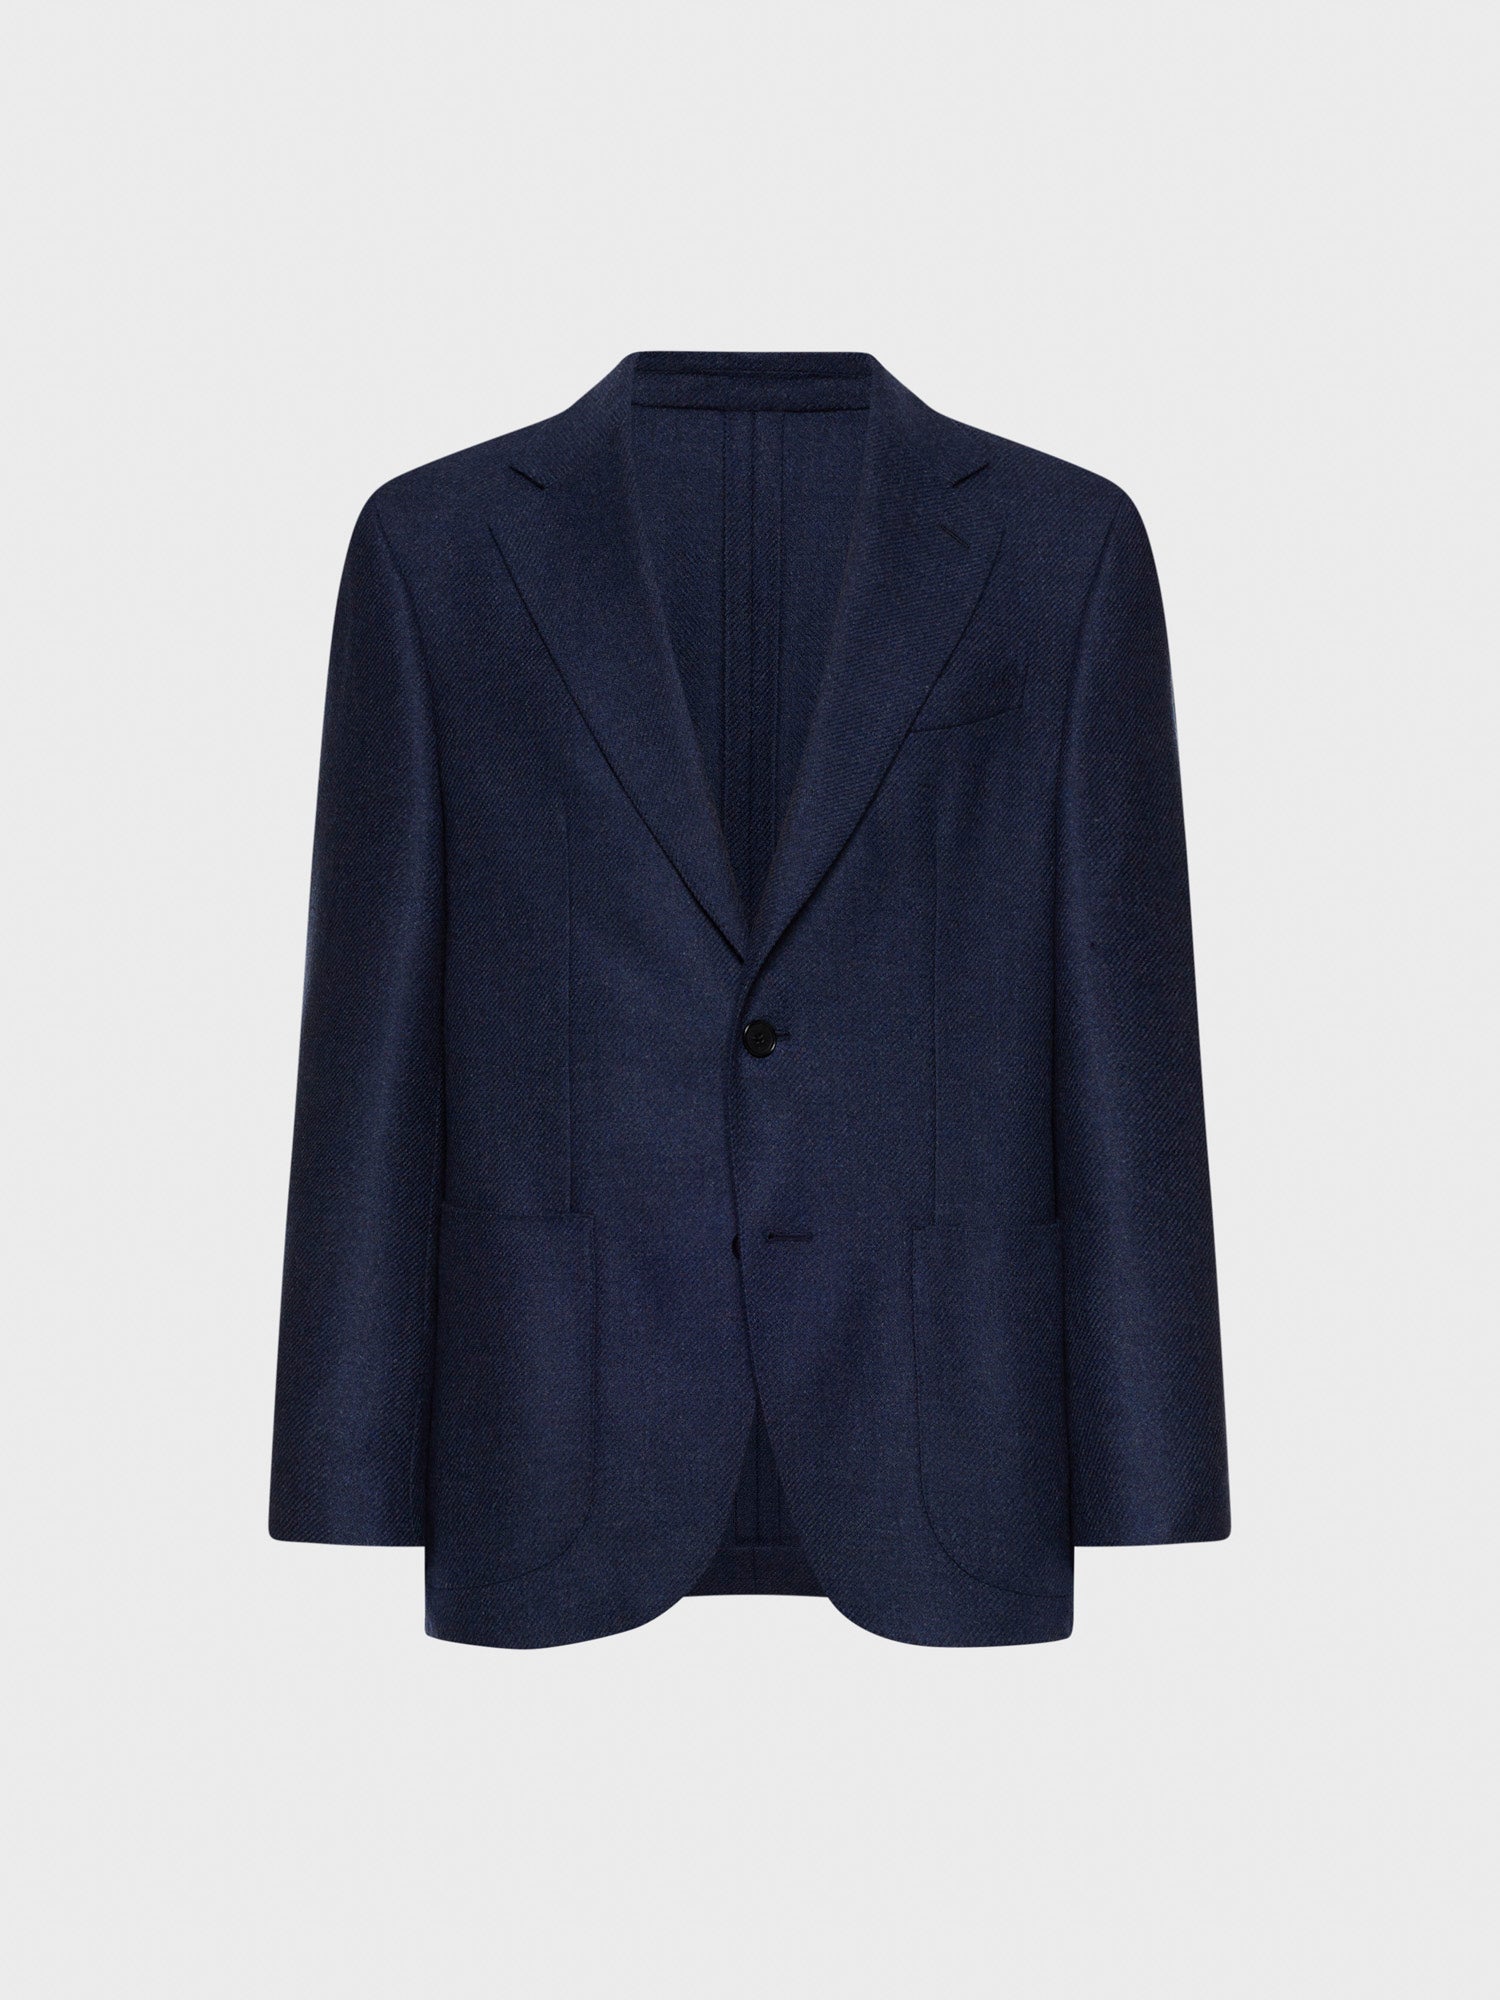 Blue butterfly jacket in cashmere and wool